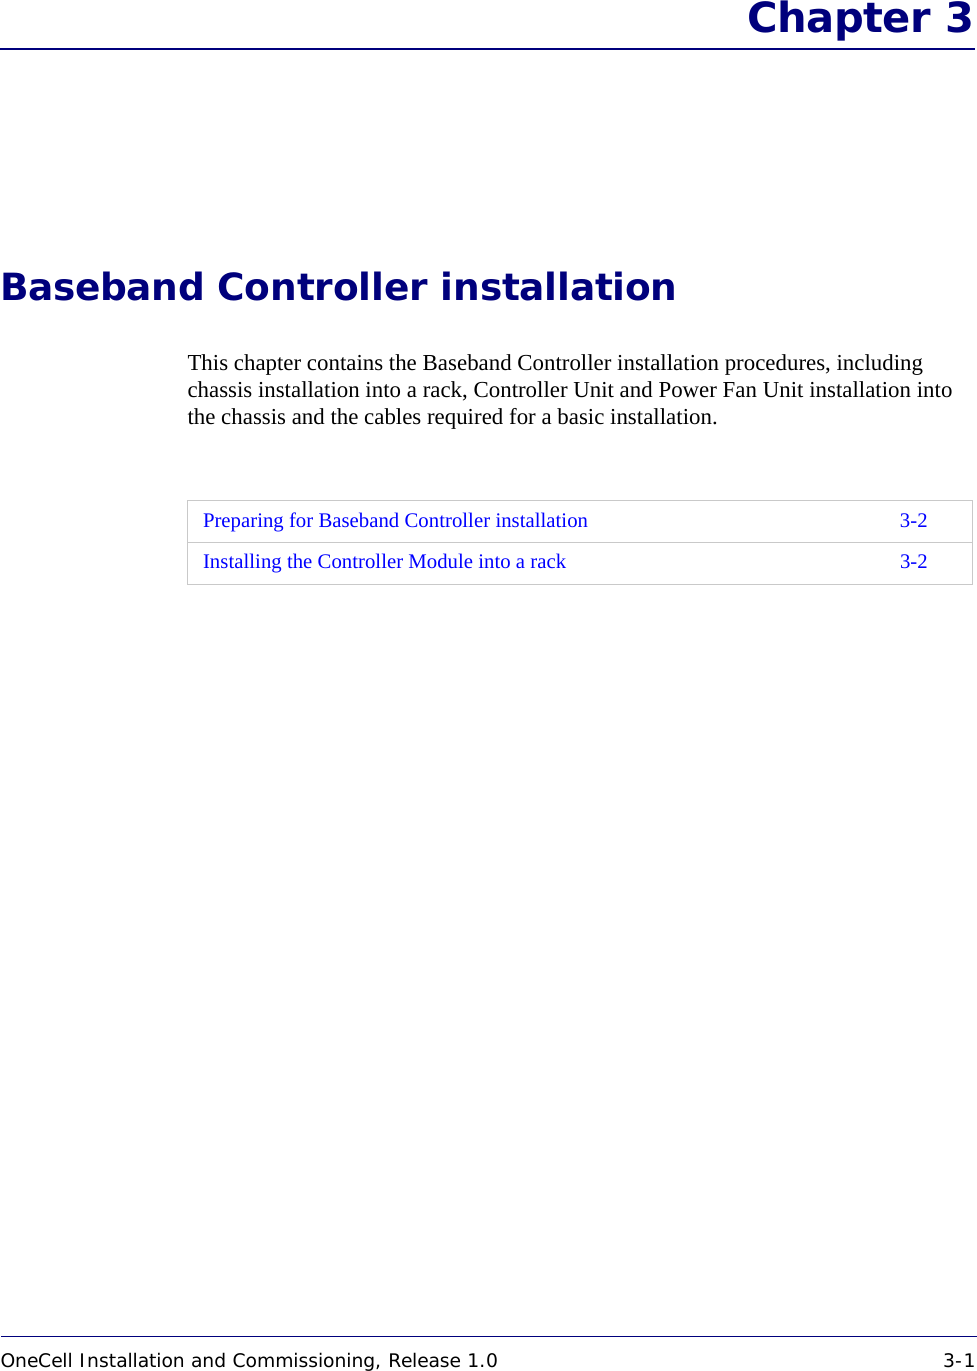 OneCell Installation and Commissioning, Release 1.0 3-1DRAFT Chapter 3Baseband Controller installationThis chapter contains the Baseband Controller installation procedures, including chassis installation into a rack, Controller Unit and Power Fan Unit installation into the chassis and the cables required for a basic installation. Preparing for Baseband Controller installation 3-2Installing the Controller Module into a rack 3-2